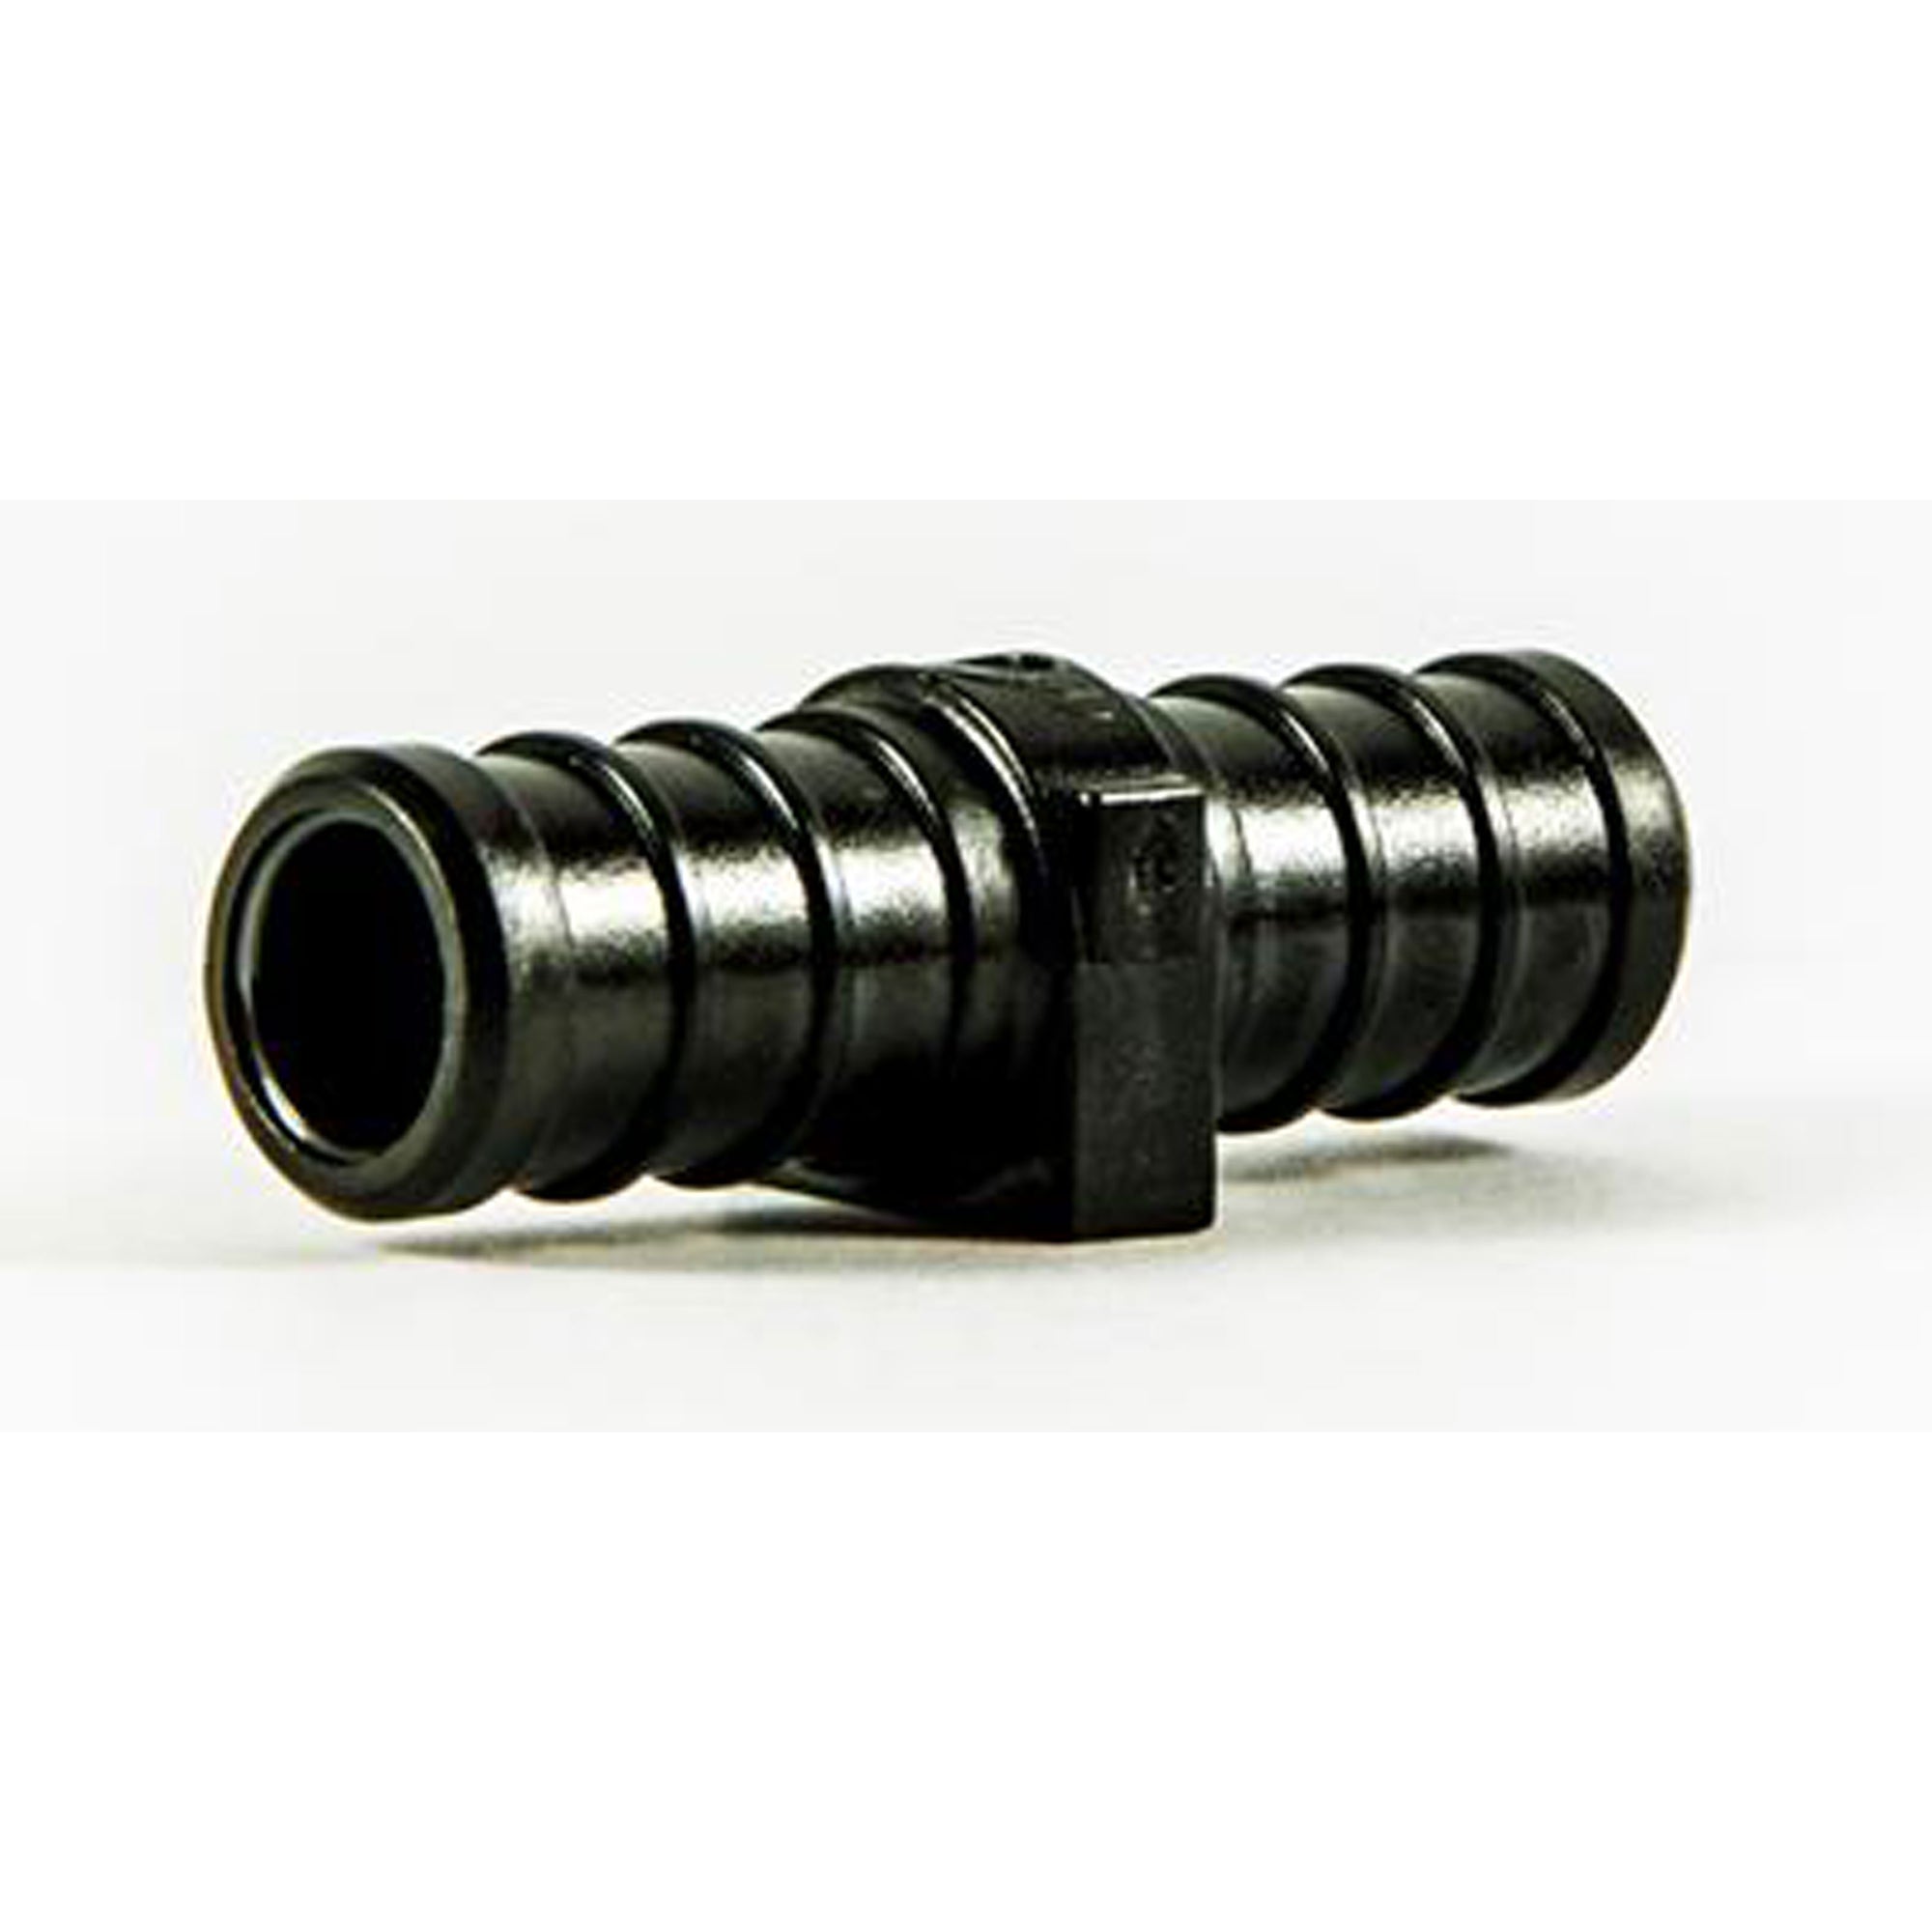 Flair-It 29855 3/8" Equal Coupling